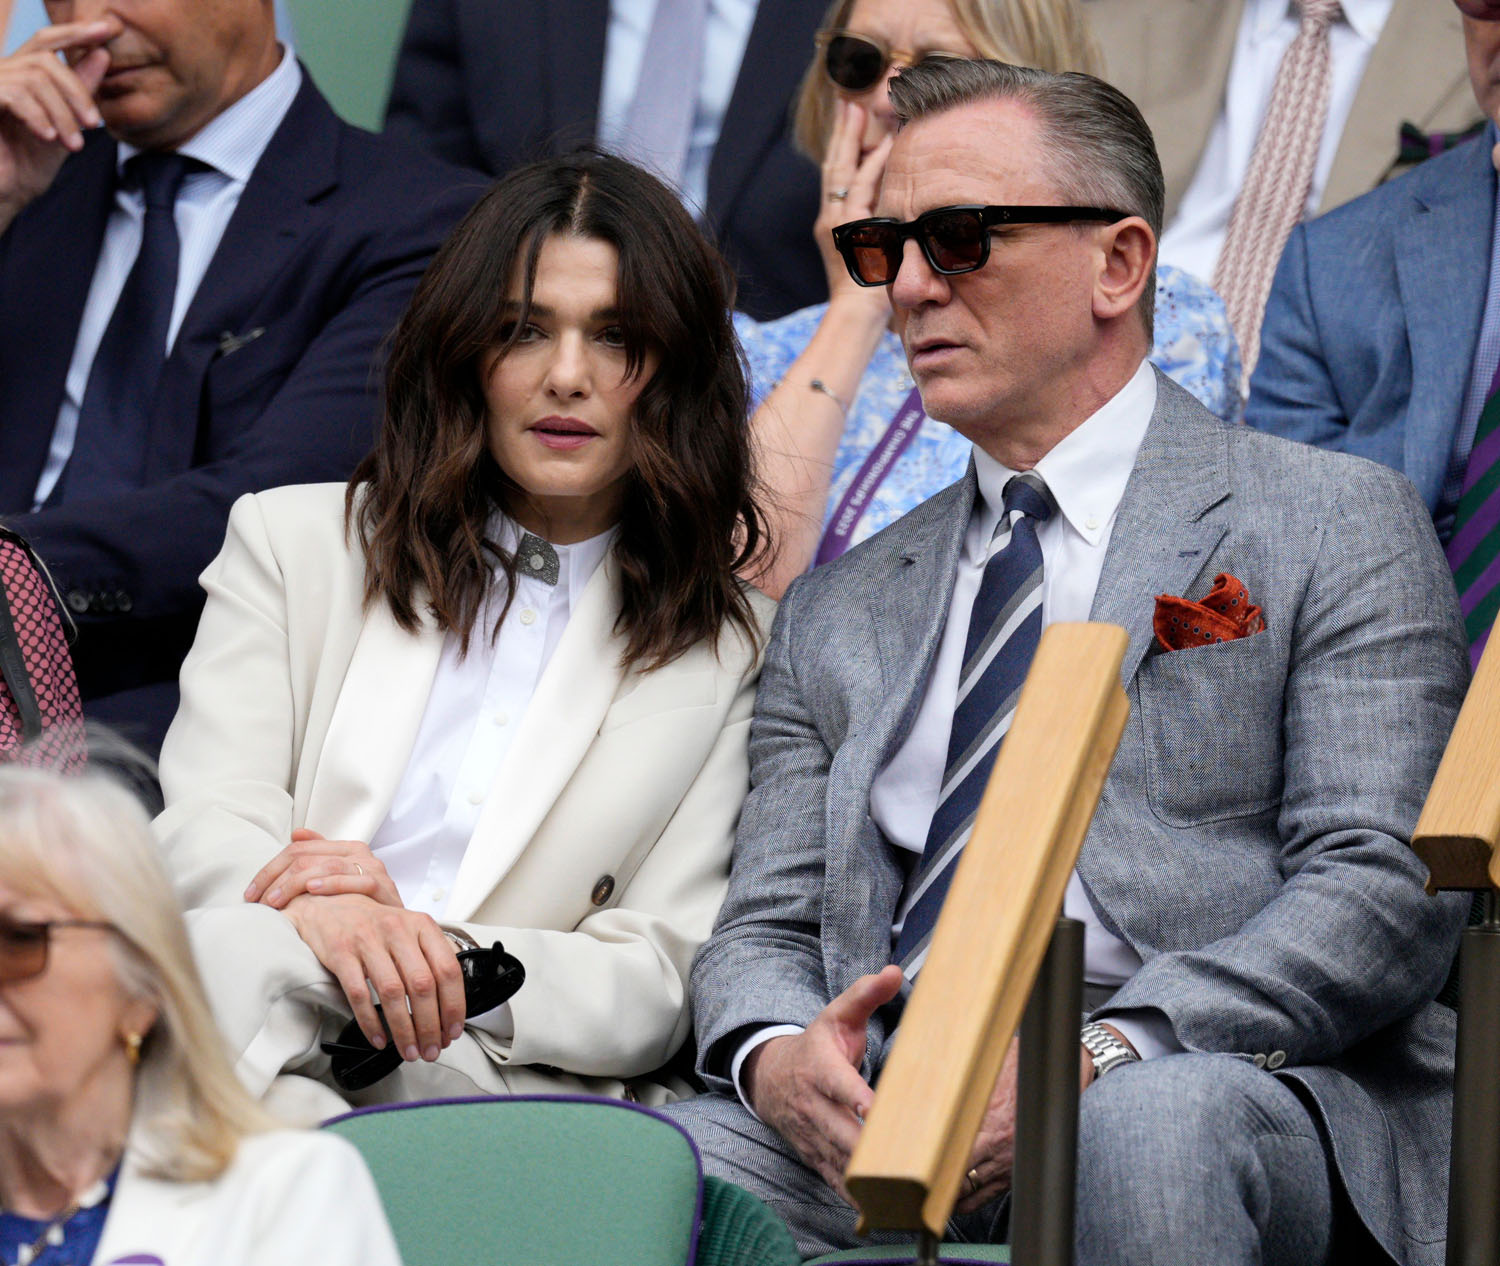 Our parents, Daniel Craig and Rachel Weisz, look amazing in his and her